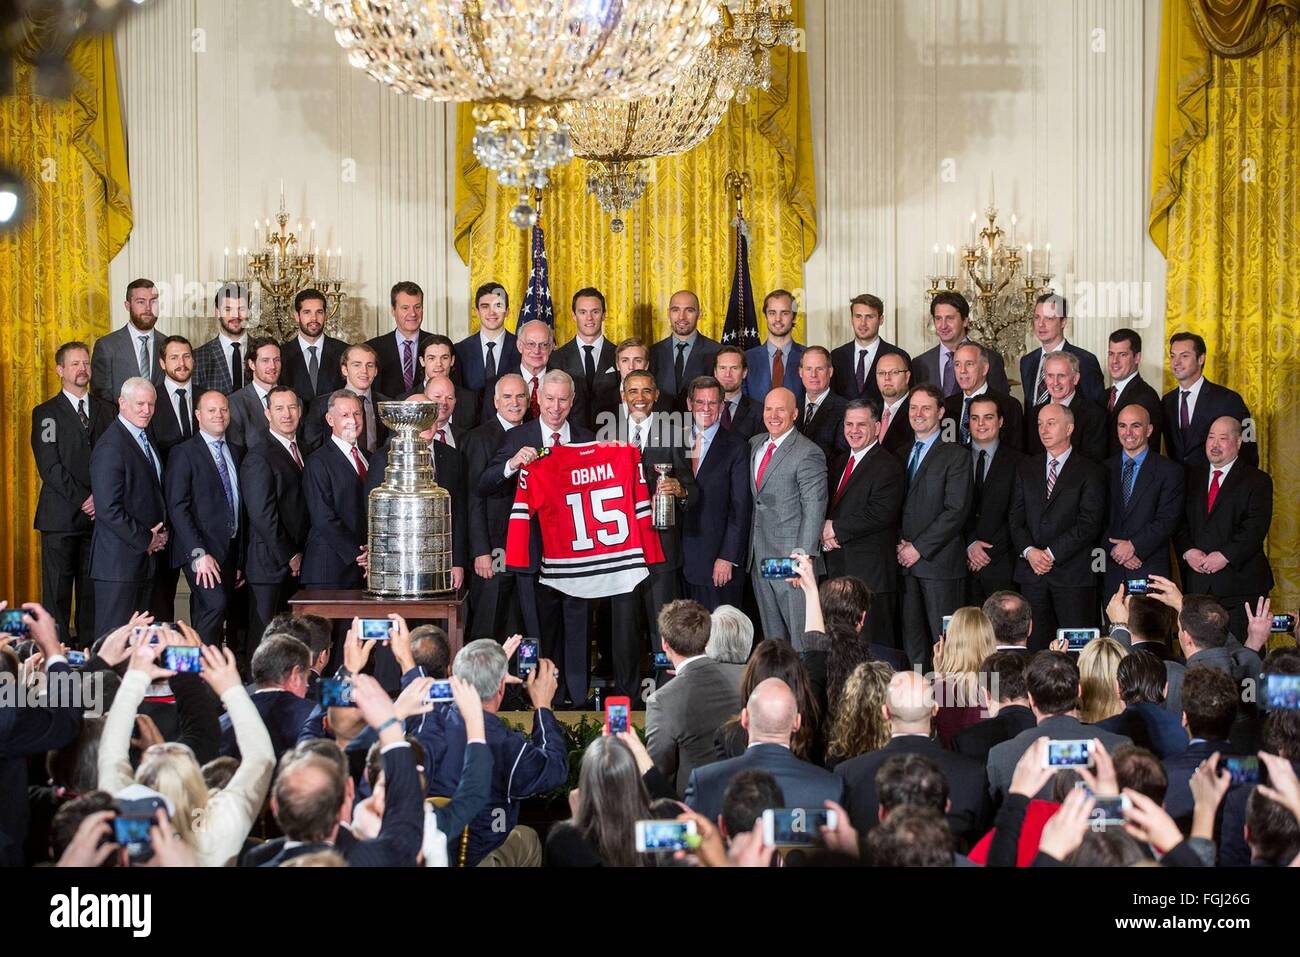 Washington DC, USA. 18th February, 2016. U.S. President Barack Obama poses with players during a ceremony to honor the 2015 NHL Stanley Cup Champion Chicago Blackhawks in the East Room of the White House February 18, 2016 in Washington, DC. Stock Photo